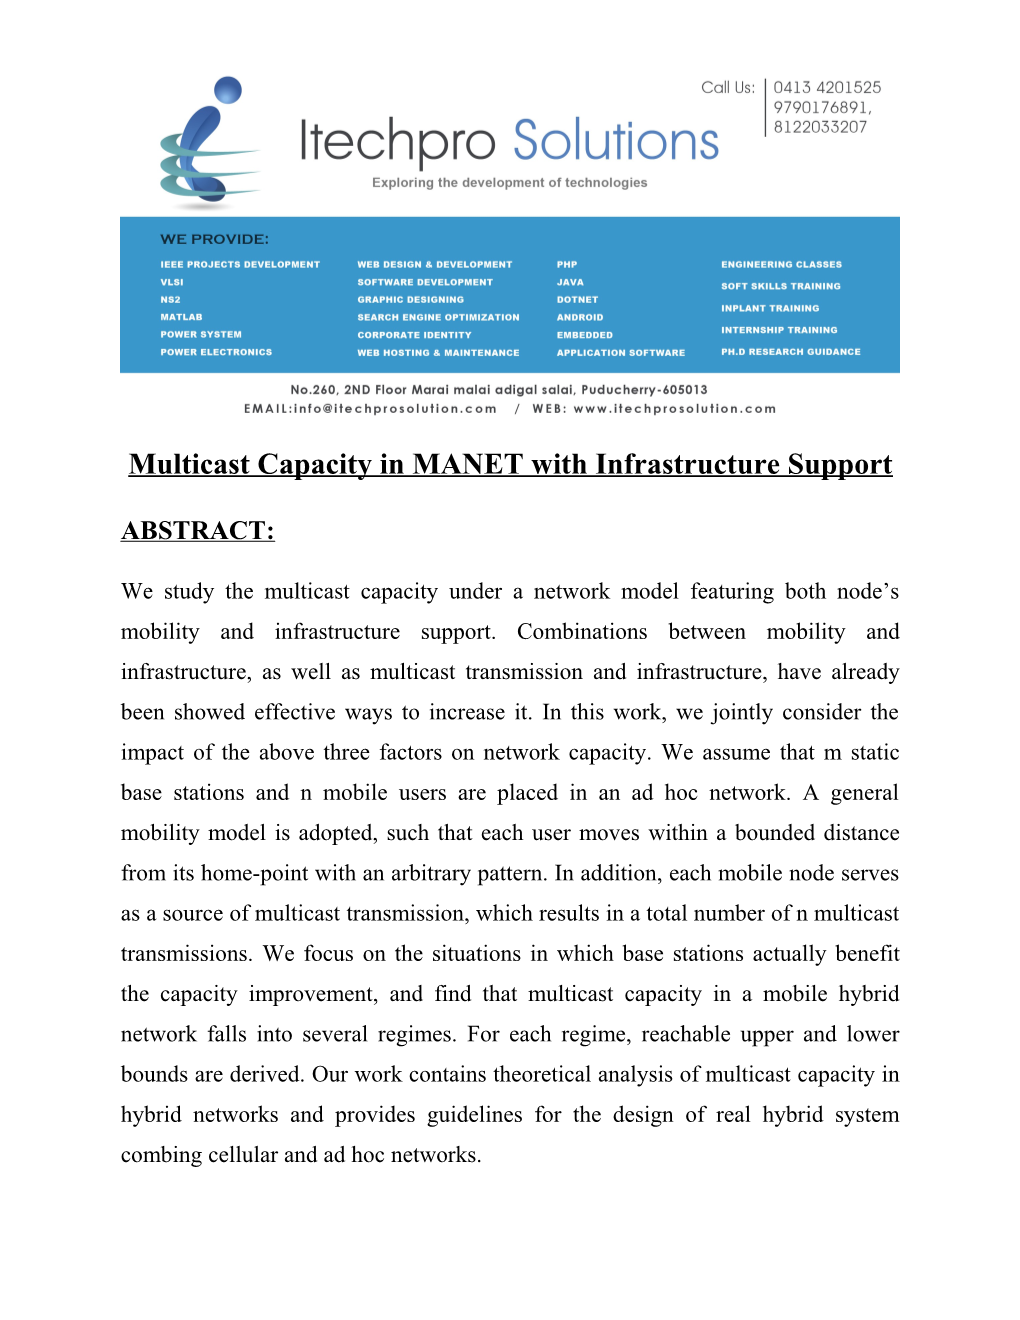 Multicast Capacity in MANET with Infrastructure Support